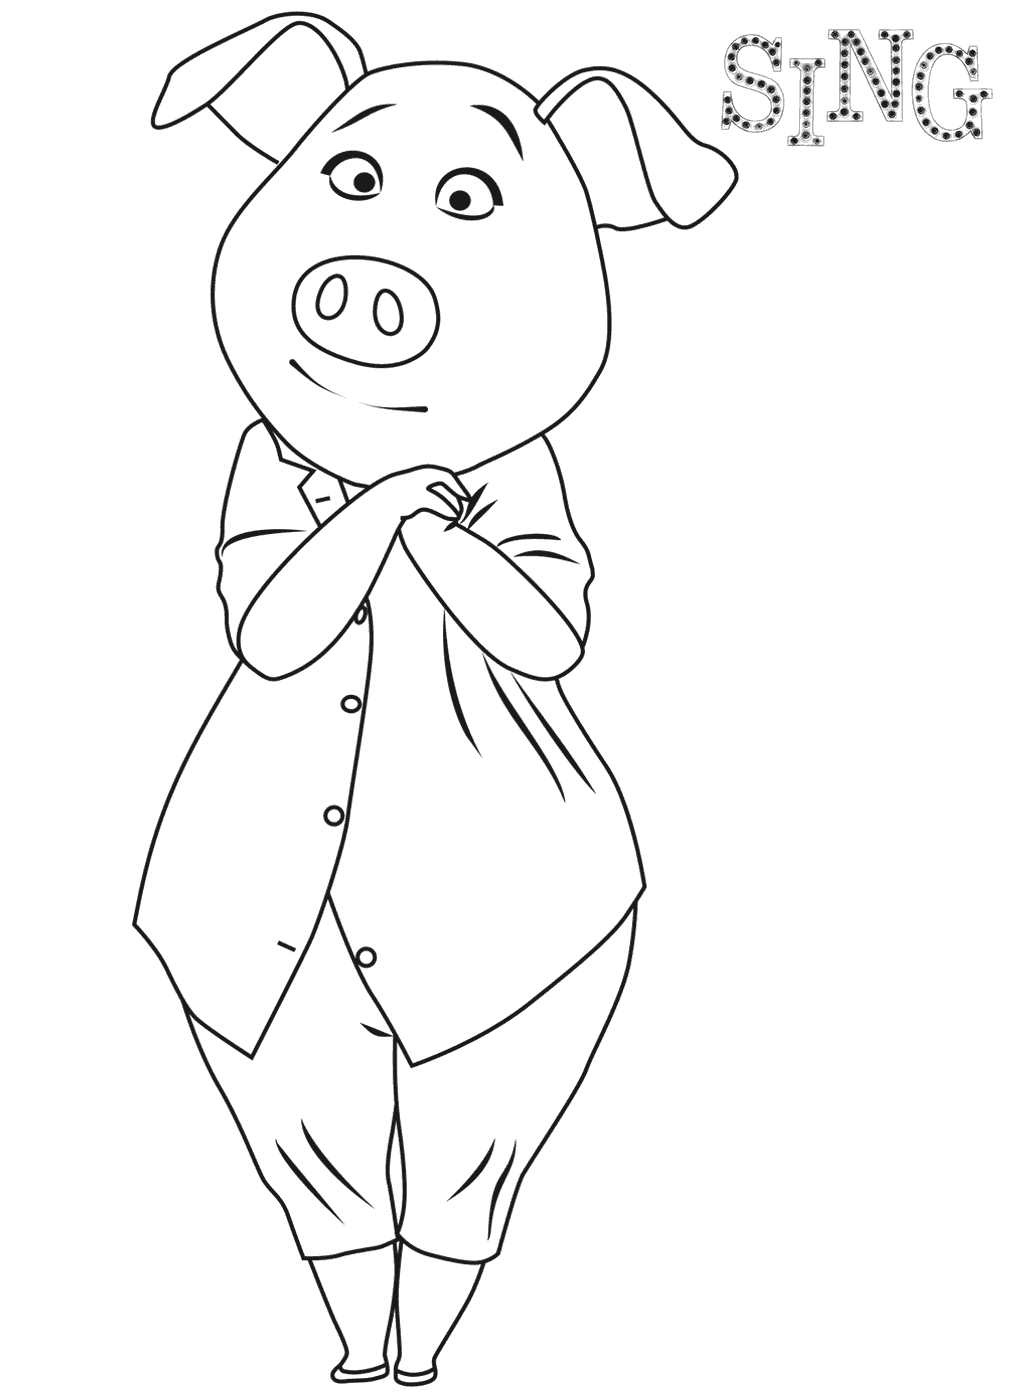 Pig Coloring Page - Coloring Home